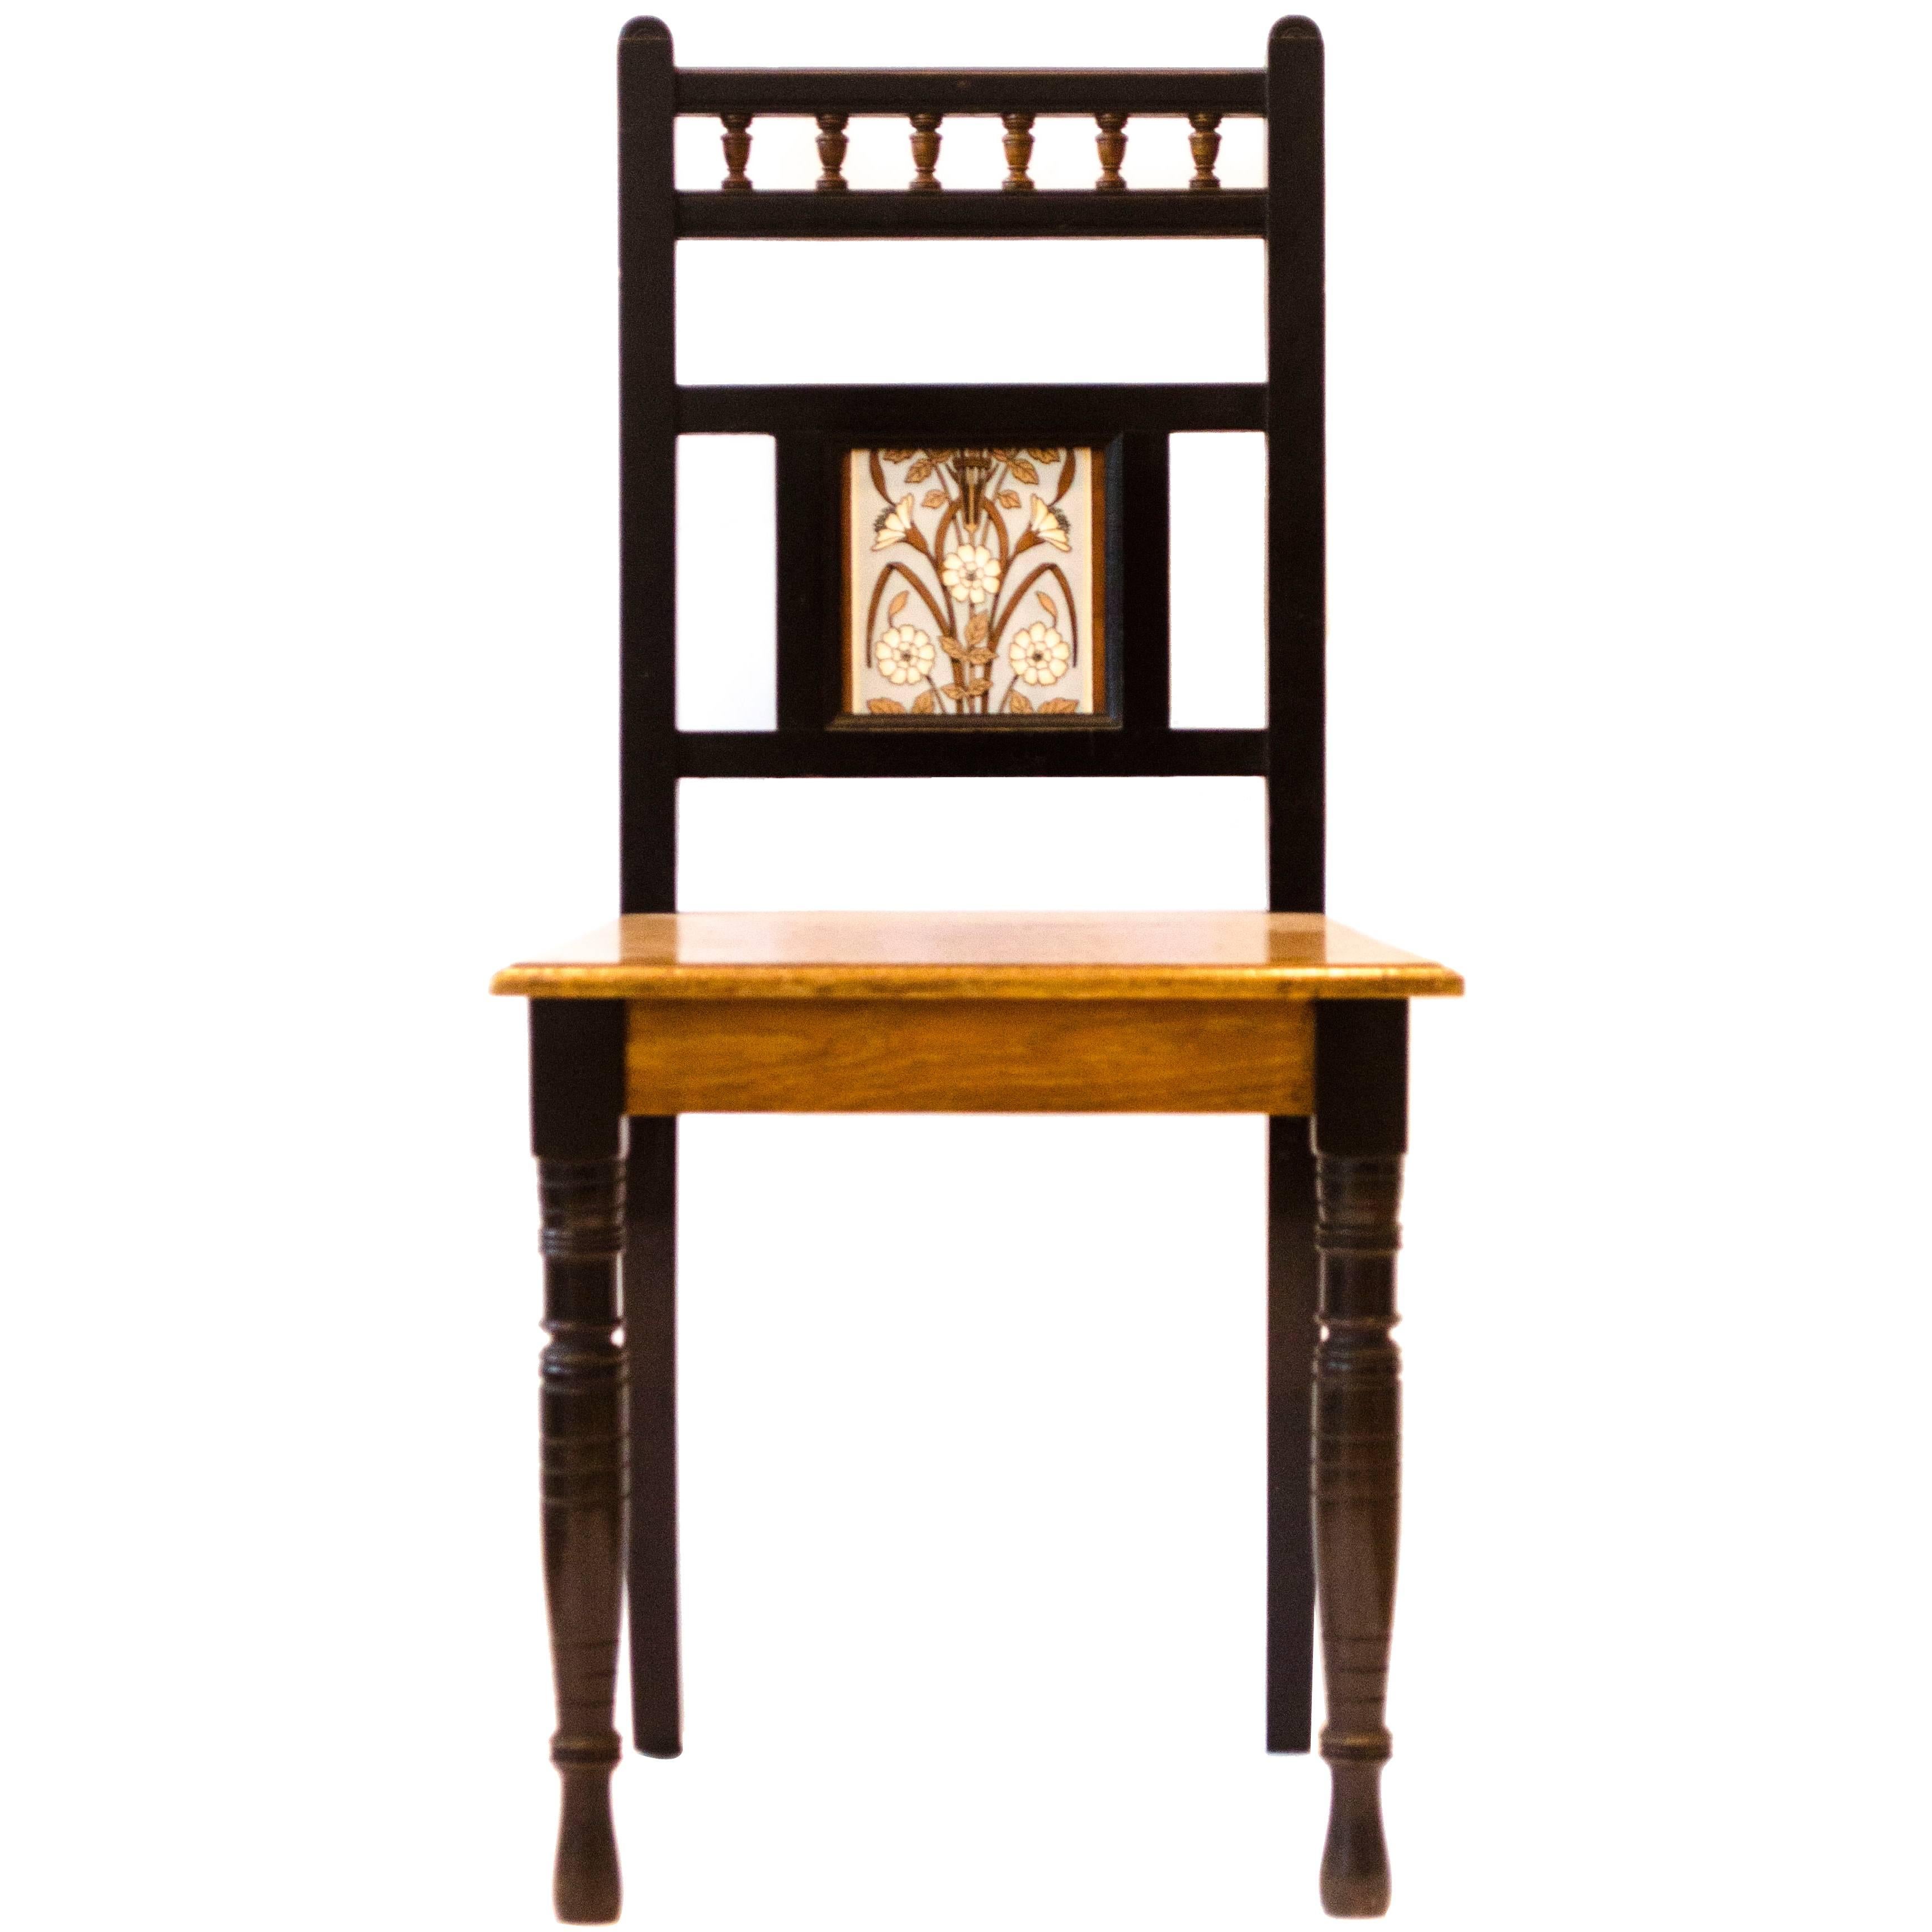 Bruce Talbert. Aesthetic Movement Hall Chair with Minton's tile by Dr C Dresser